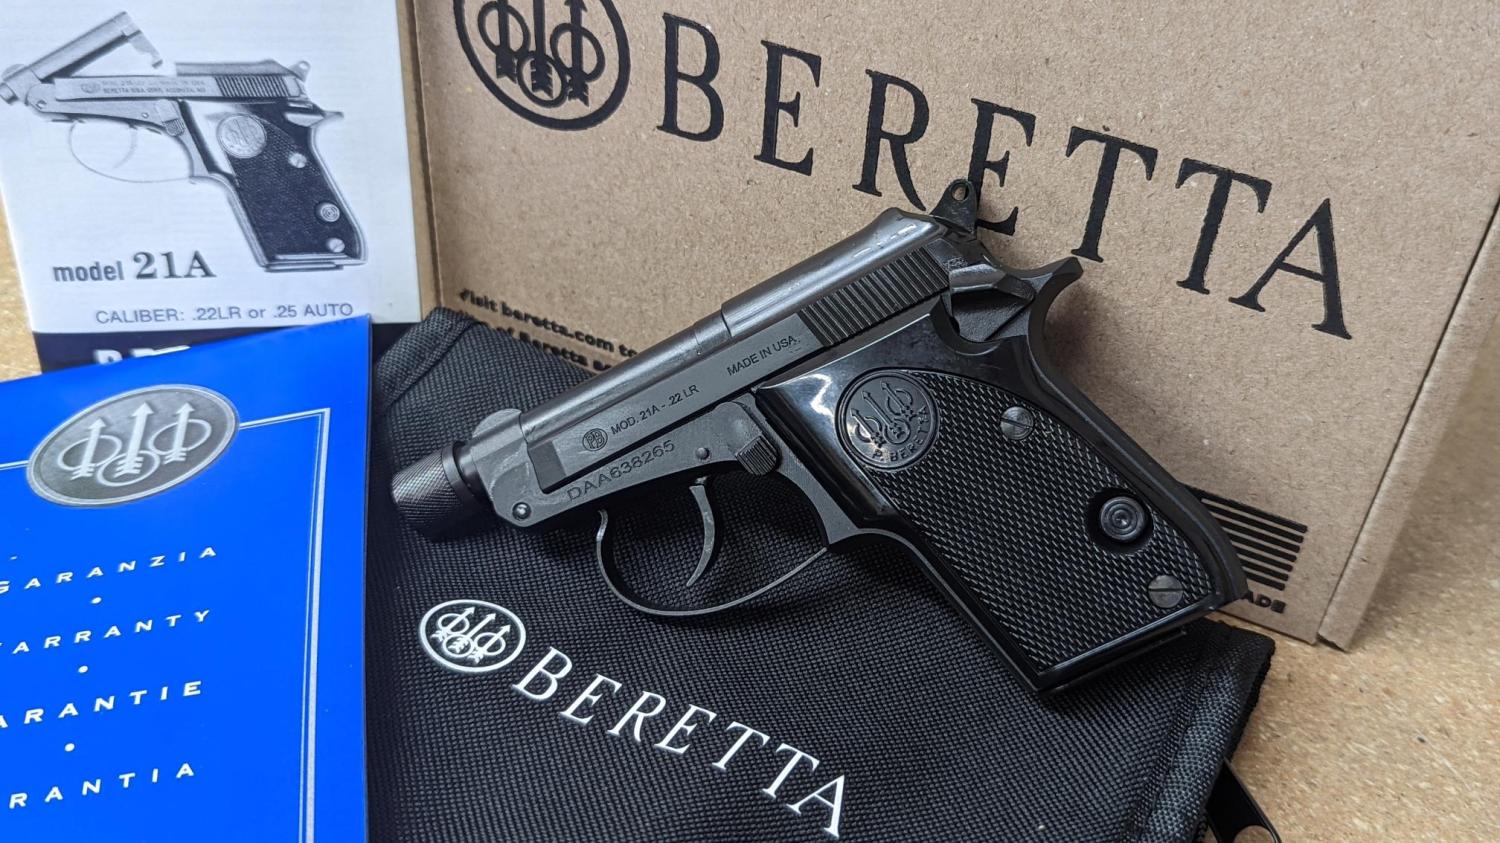 wolf-army-military-beretta-apx-rebate-the-ultimate-harmony-of-form